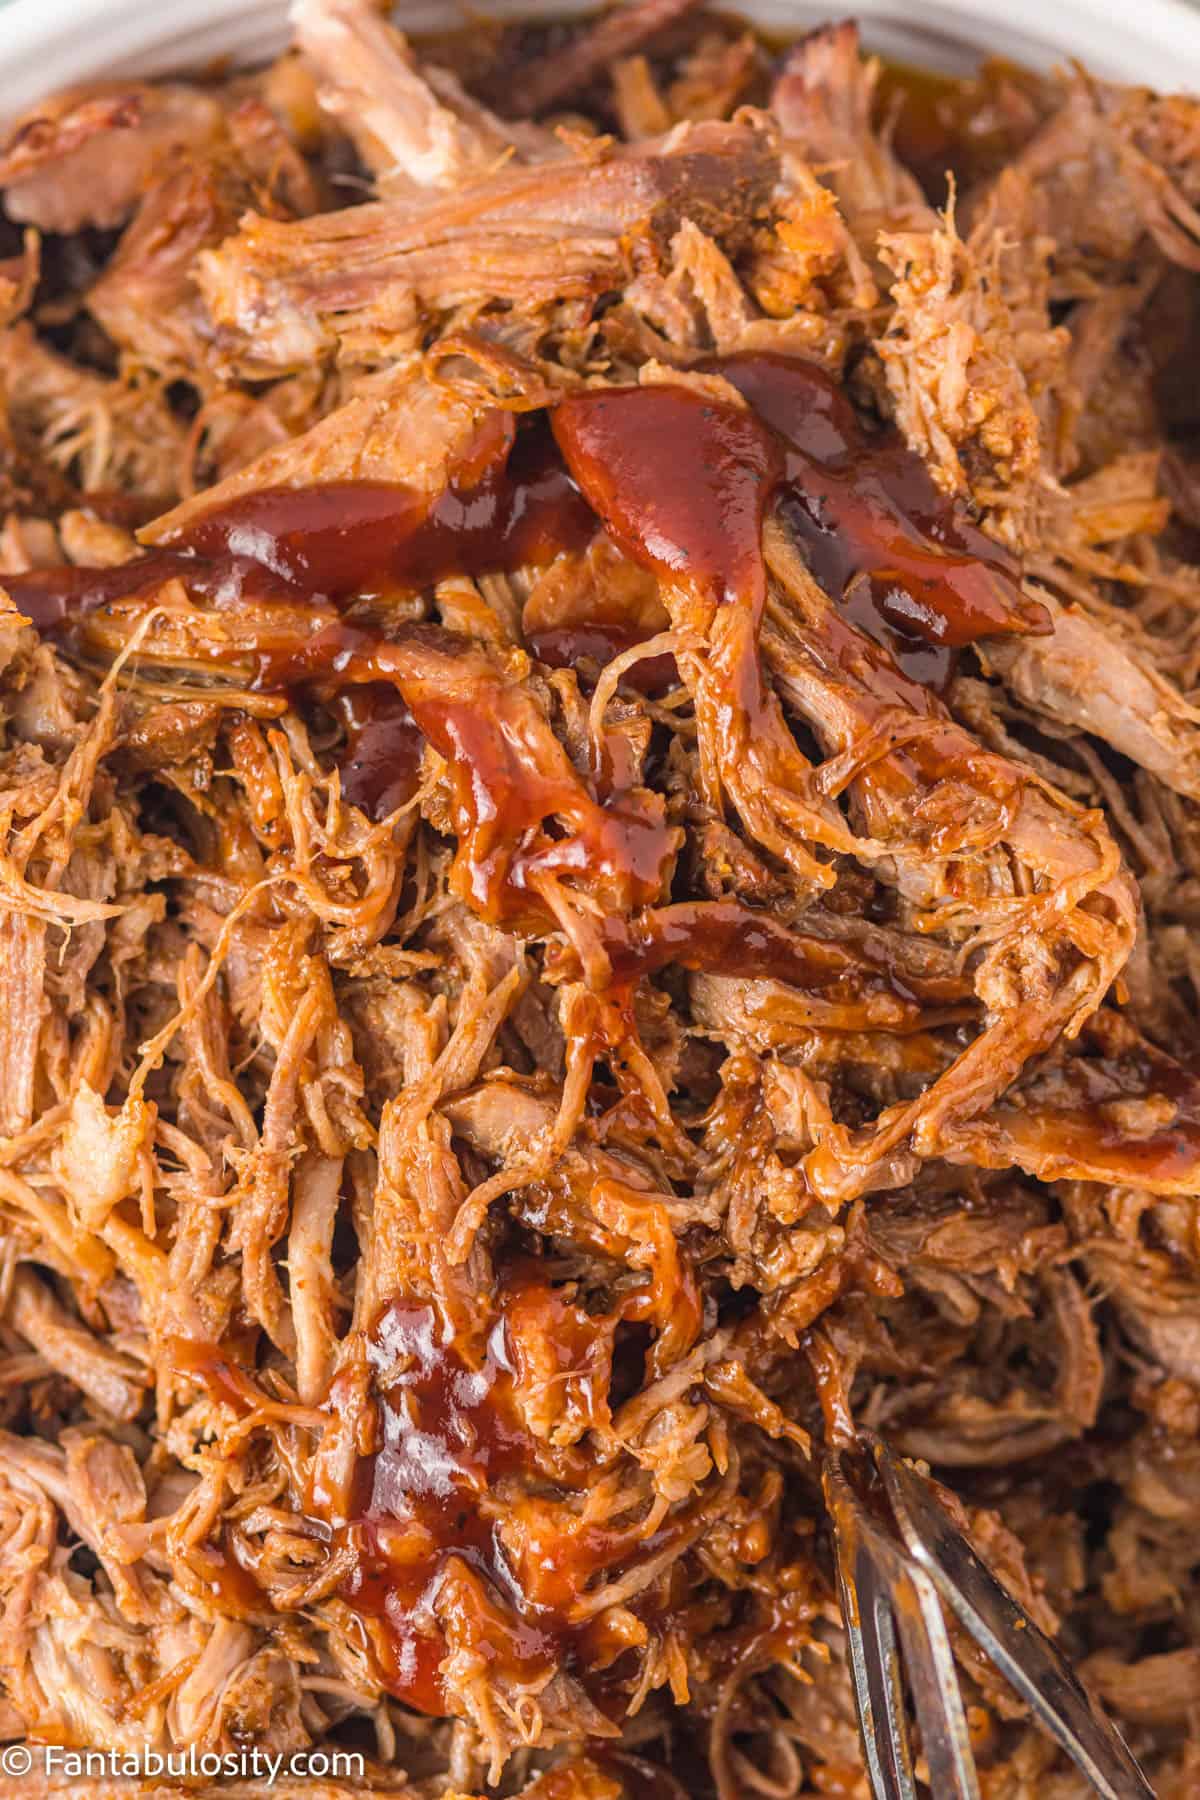 Pulled pork in bowl with bbq sauce drizzled on top